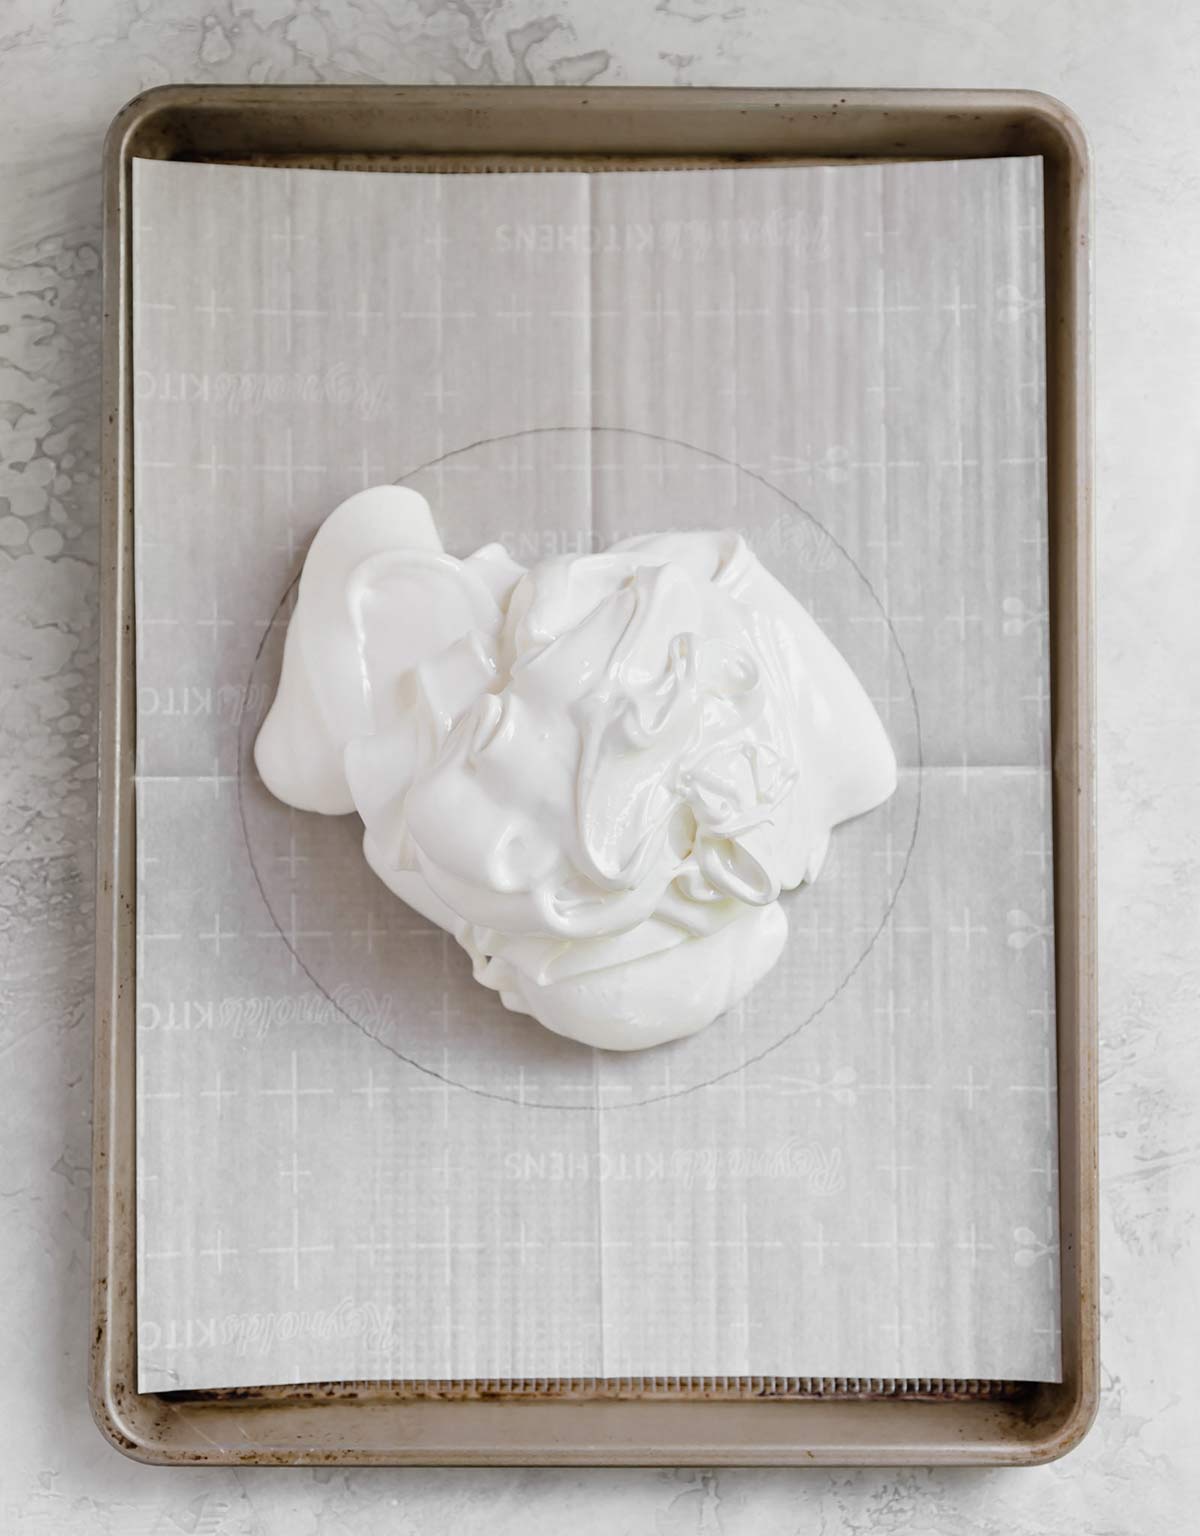 Meringue piled onto a parchment-lined baking sheet.